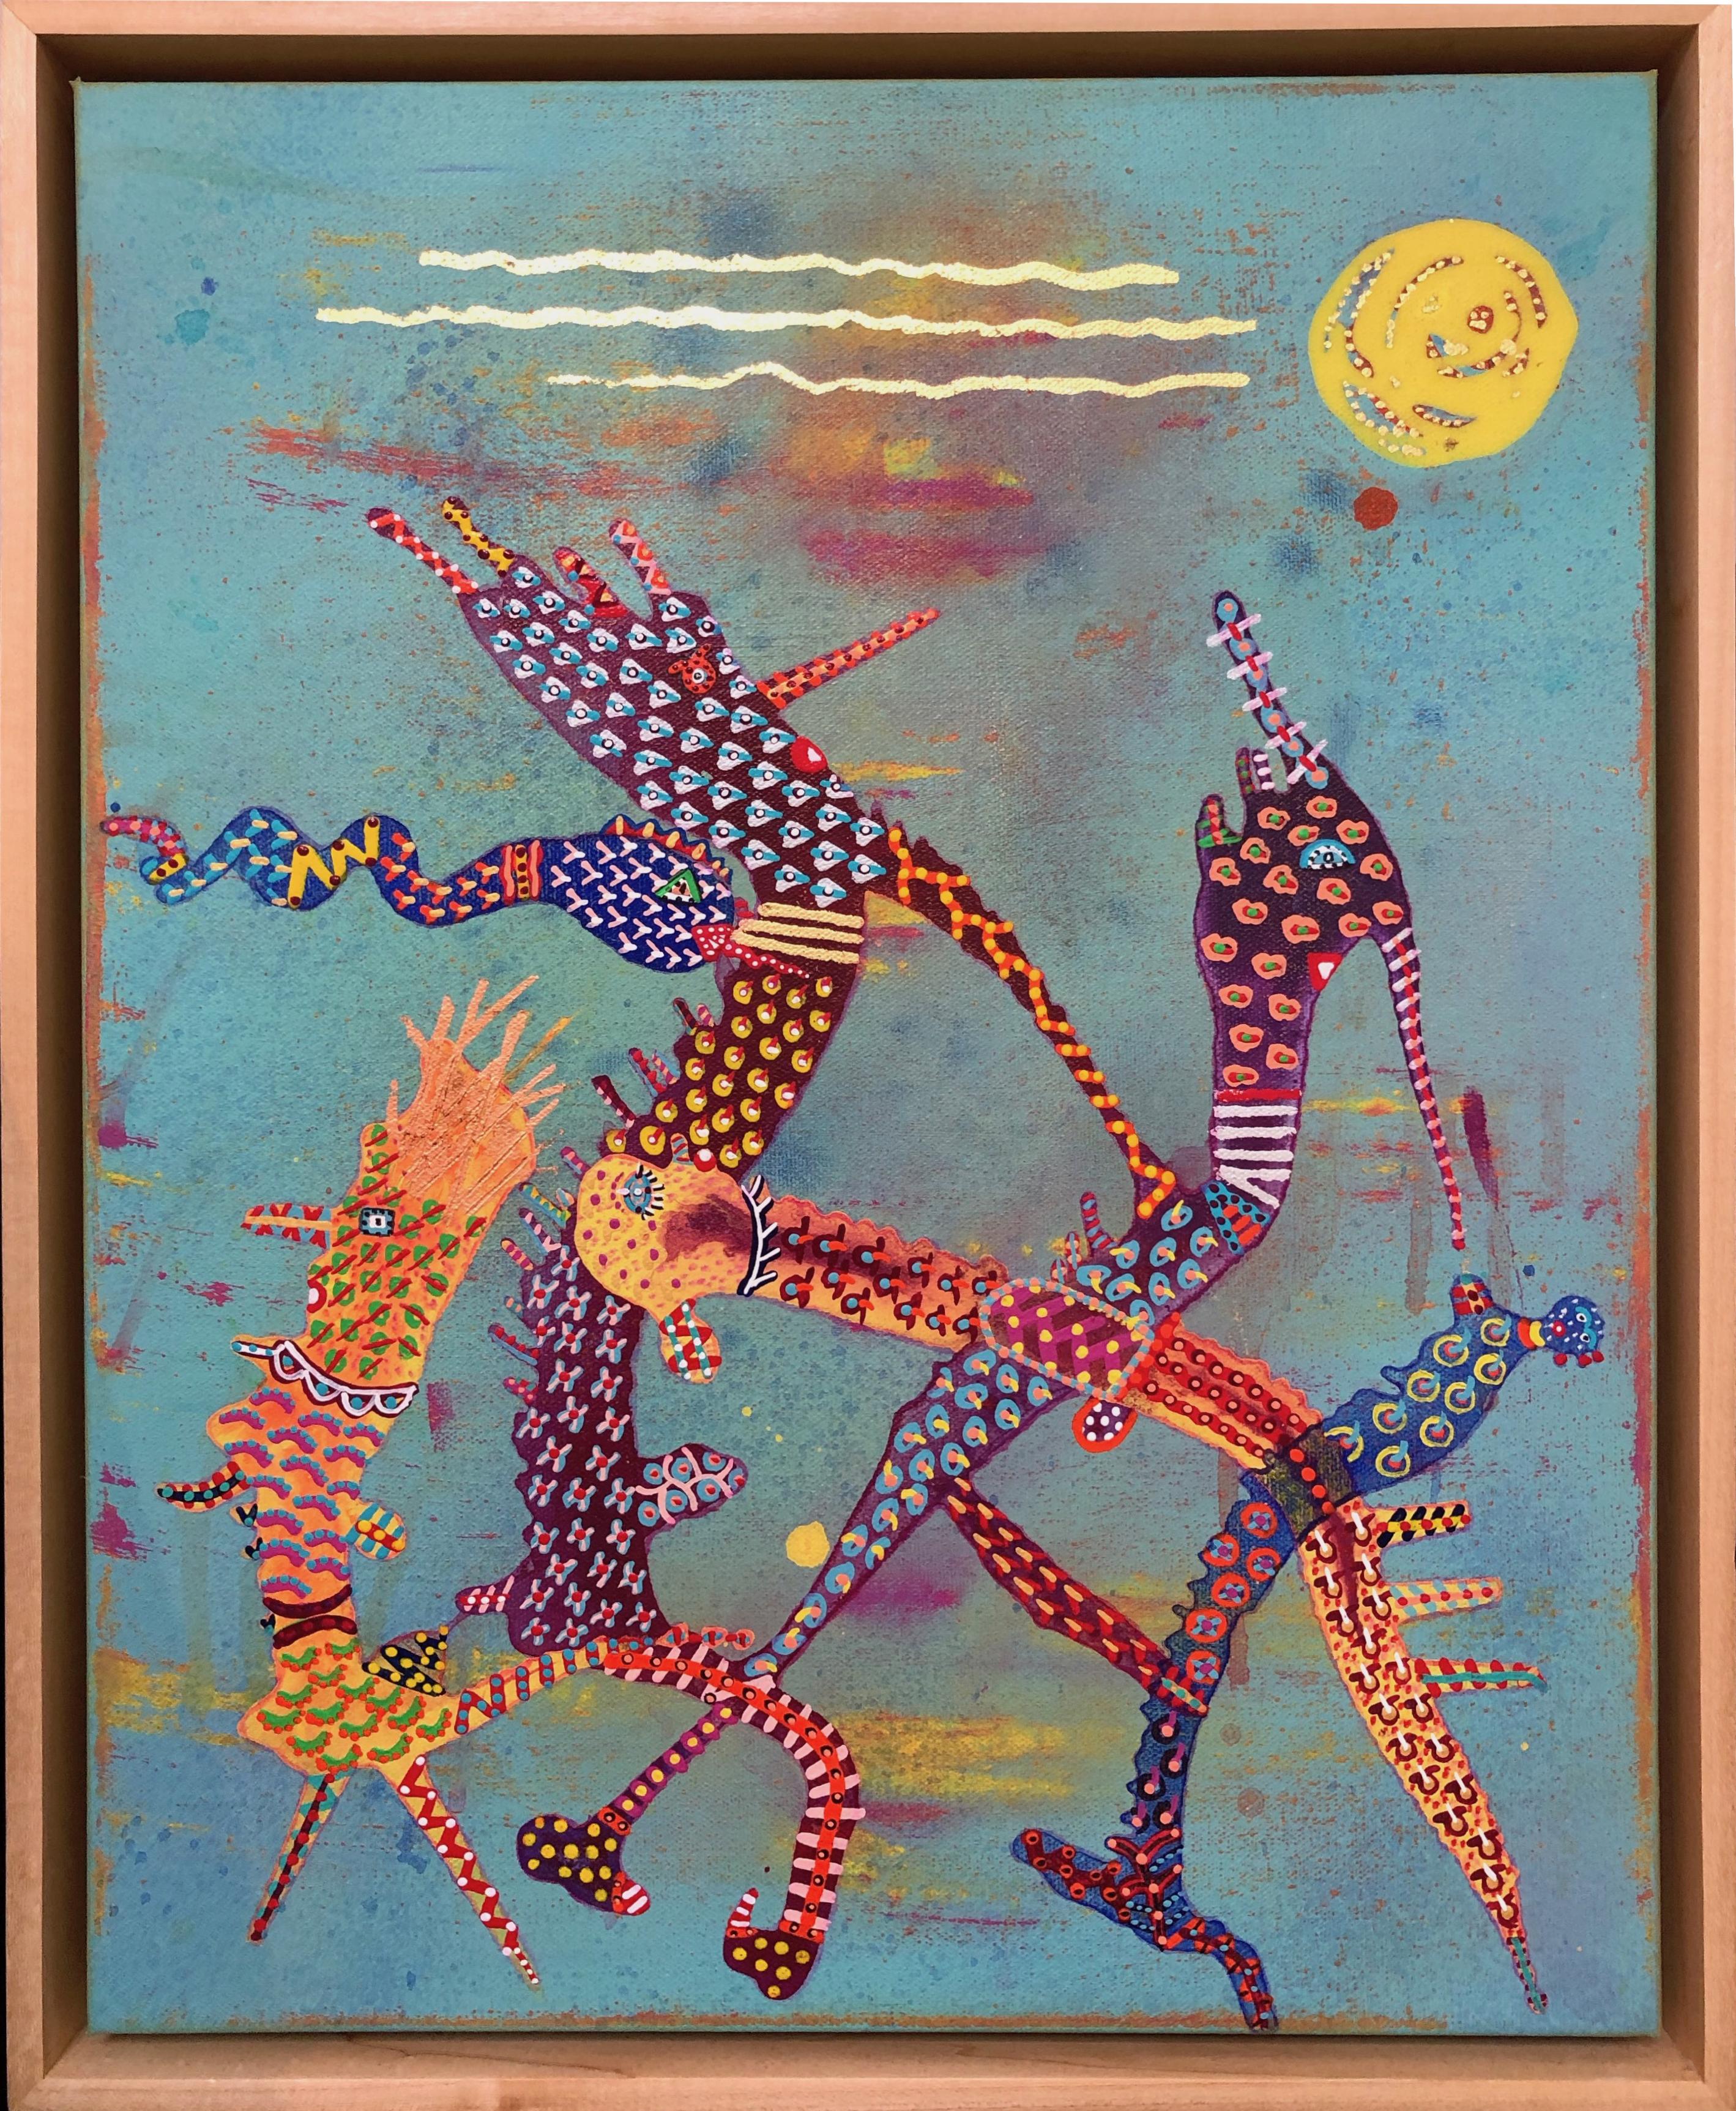 This is an original painting by Astrid Francis. It is framed with a 2" natural wood floating frame making the entire piece 21.5" x 17.5". 

Astrid Francis operates in a realm of fantastical surrealism, utilizing bright colors to create other worldly